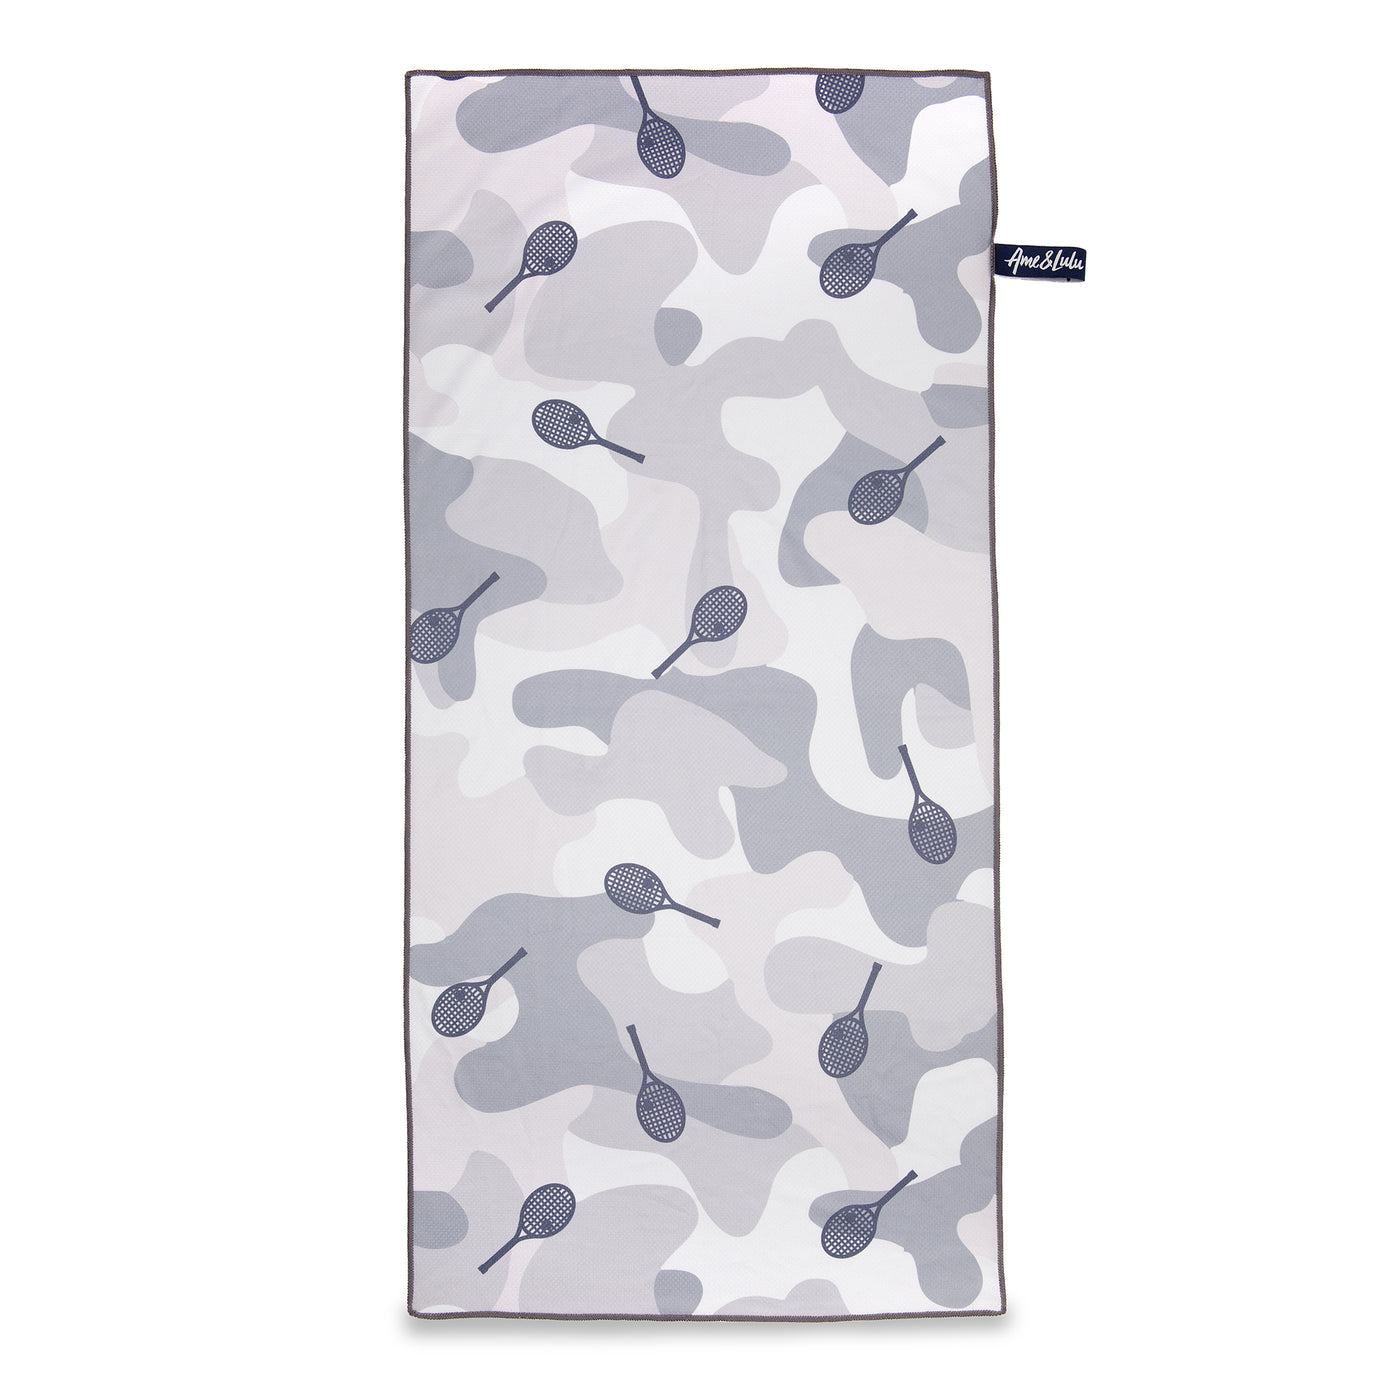 rectangular towel printed with grey camo and repeating grey tennis racquet pattern.